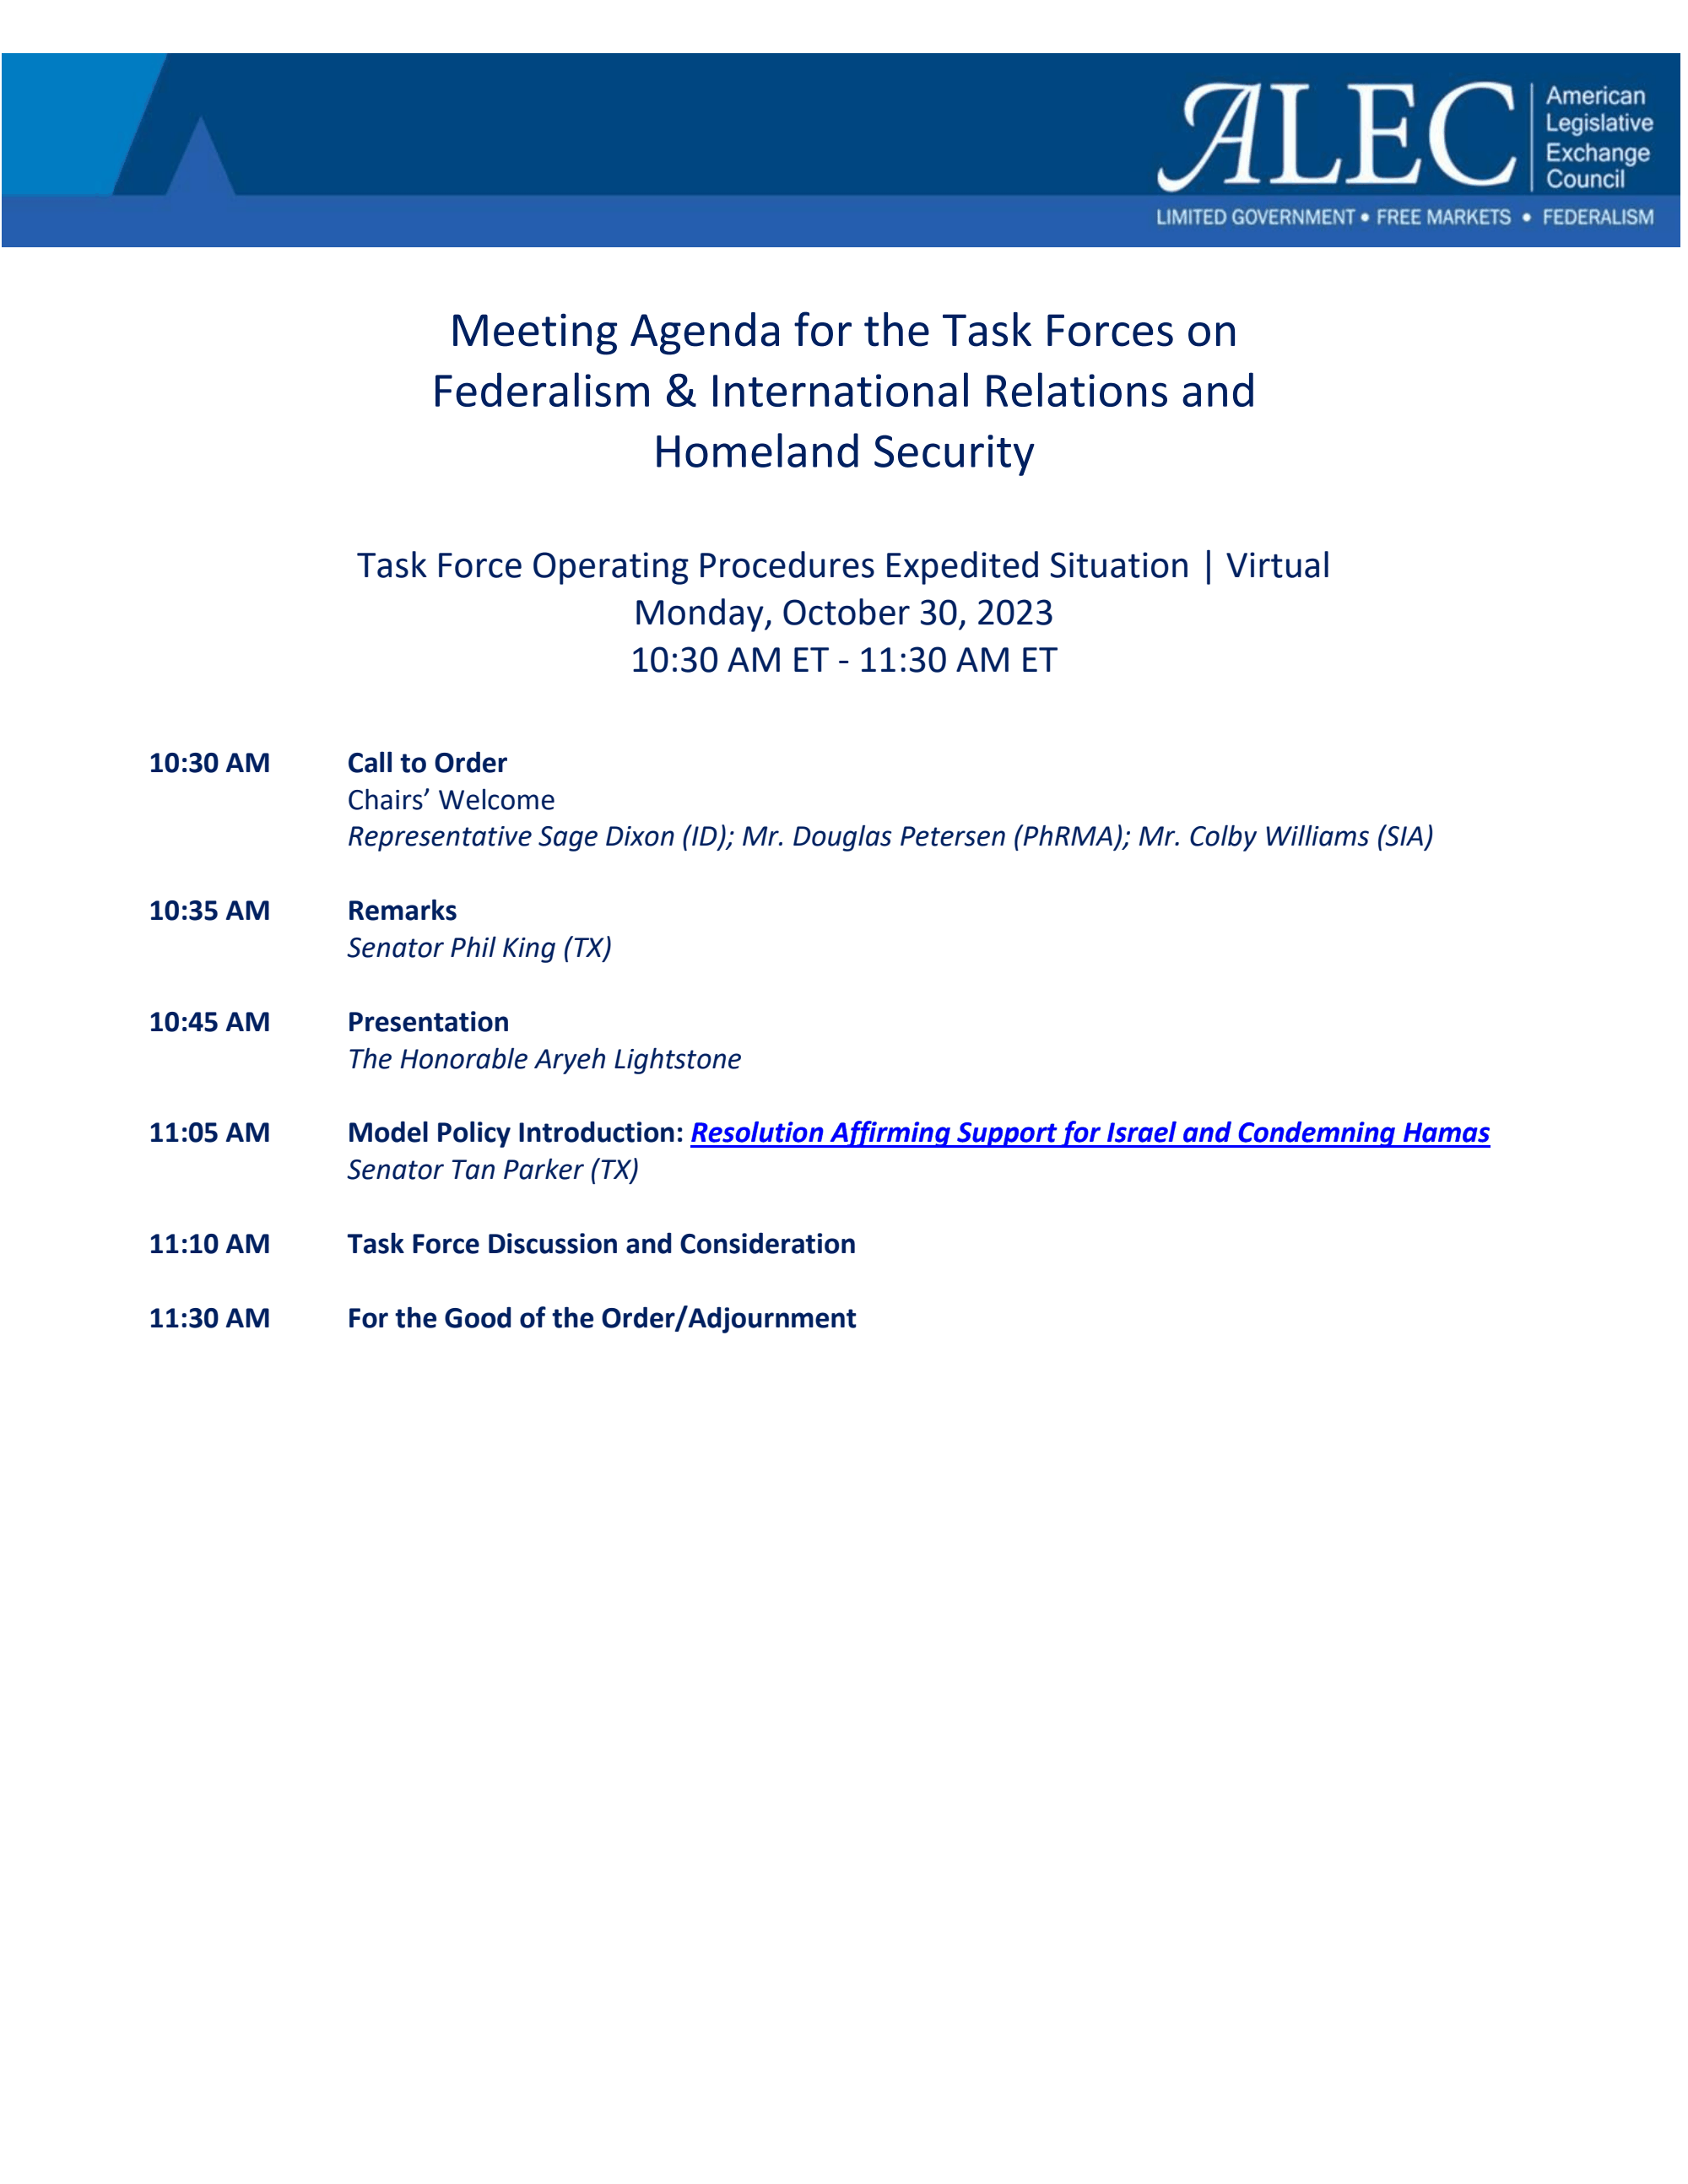 Page 1 of Meeting Agenda for ALEC Task Forces on Federalism & International Relations and Homeland Security, 10.30.23